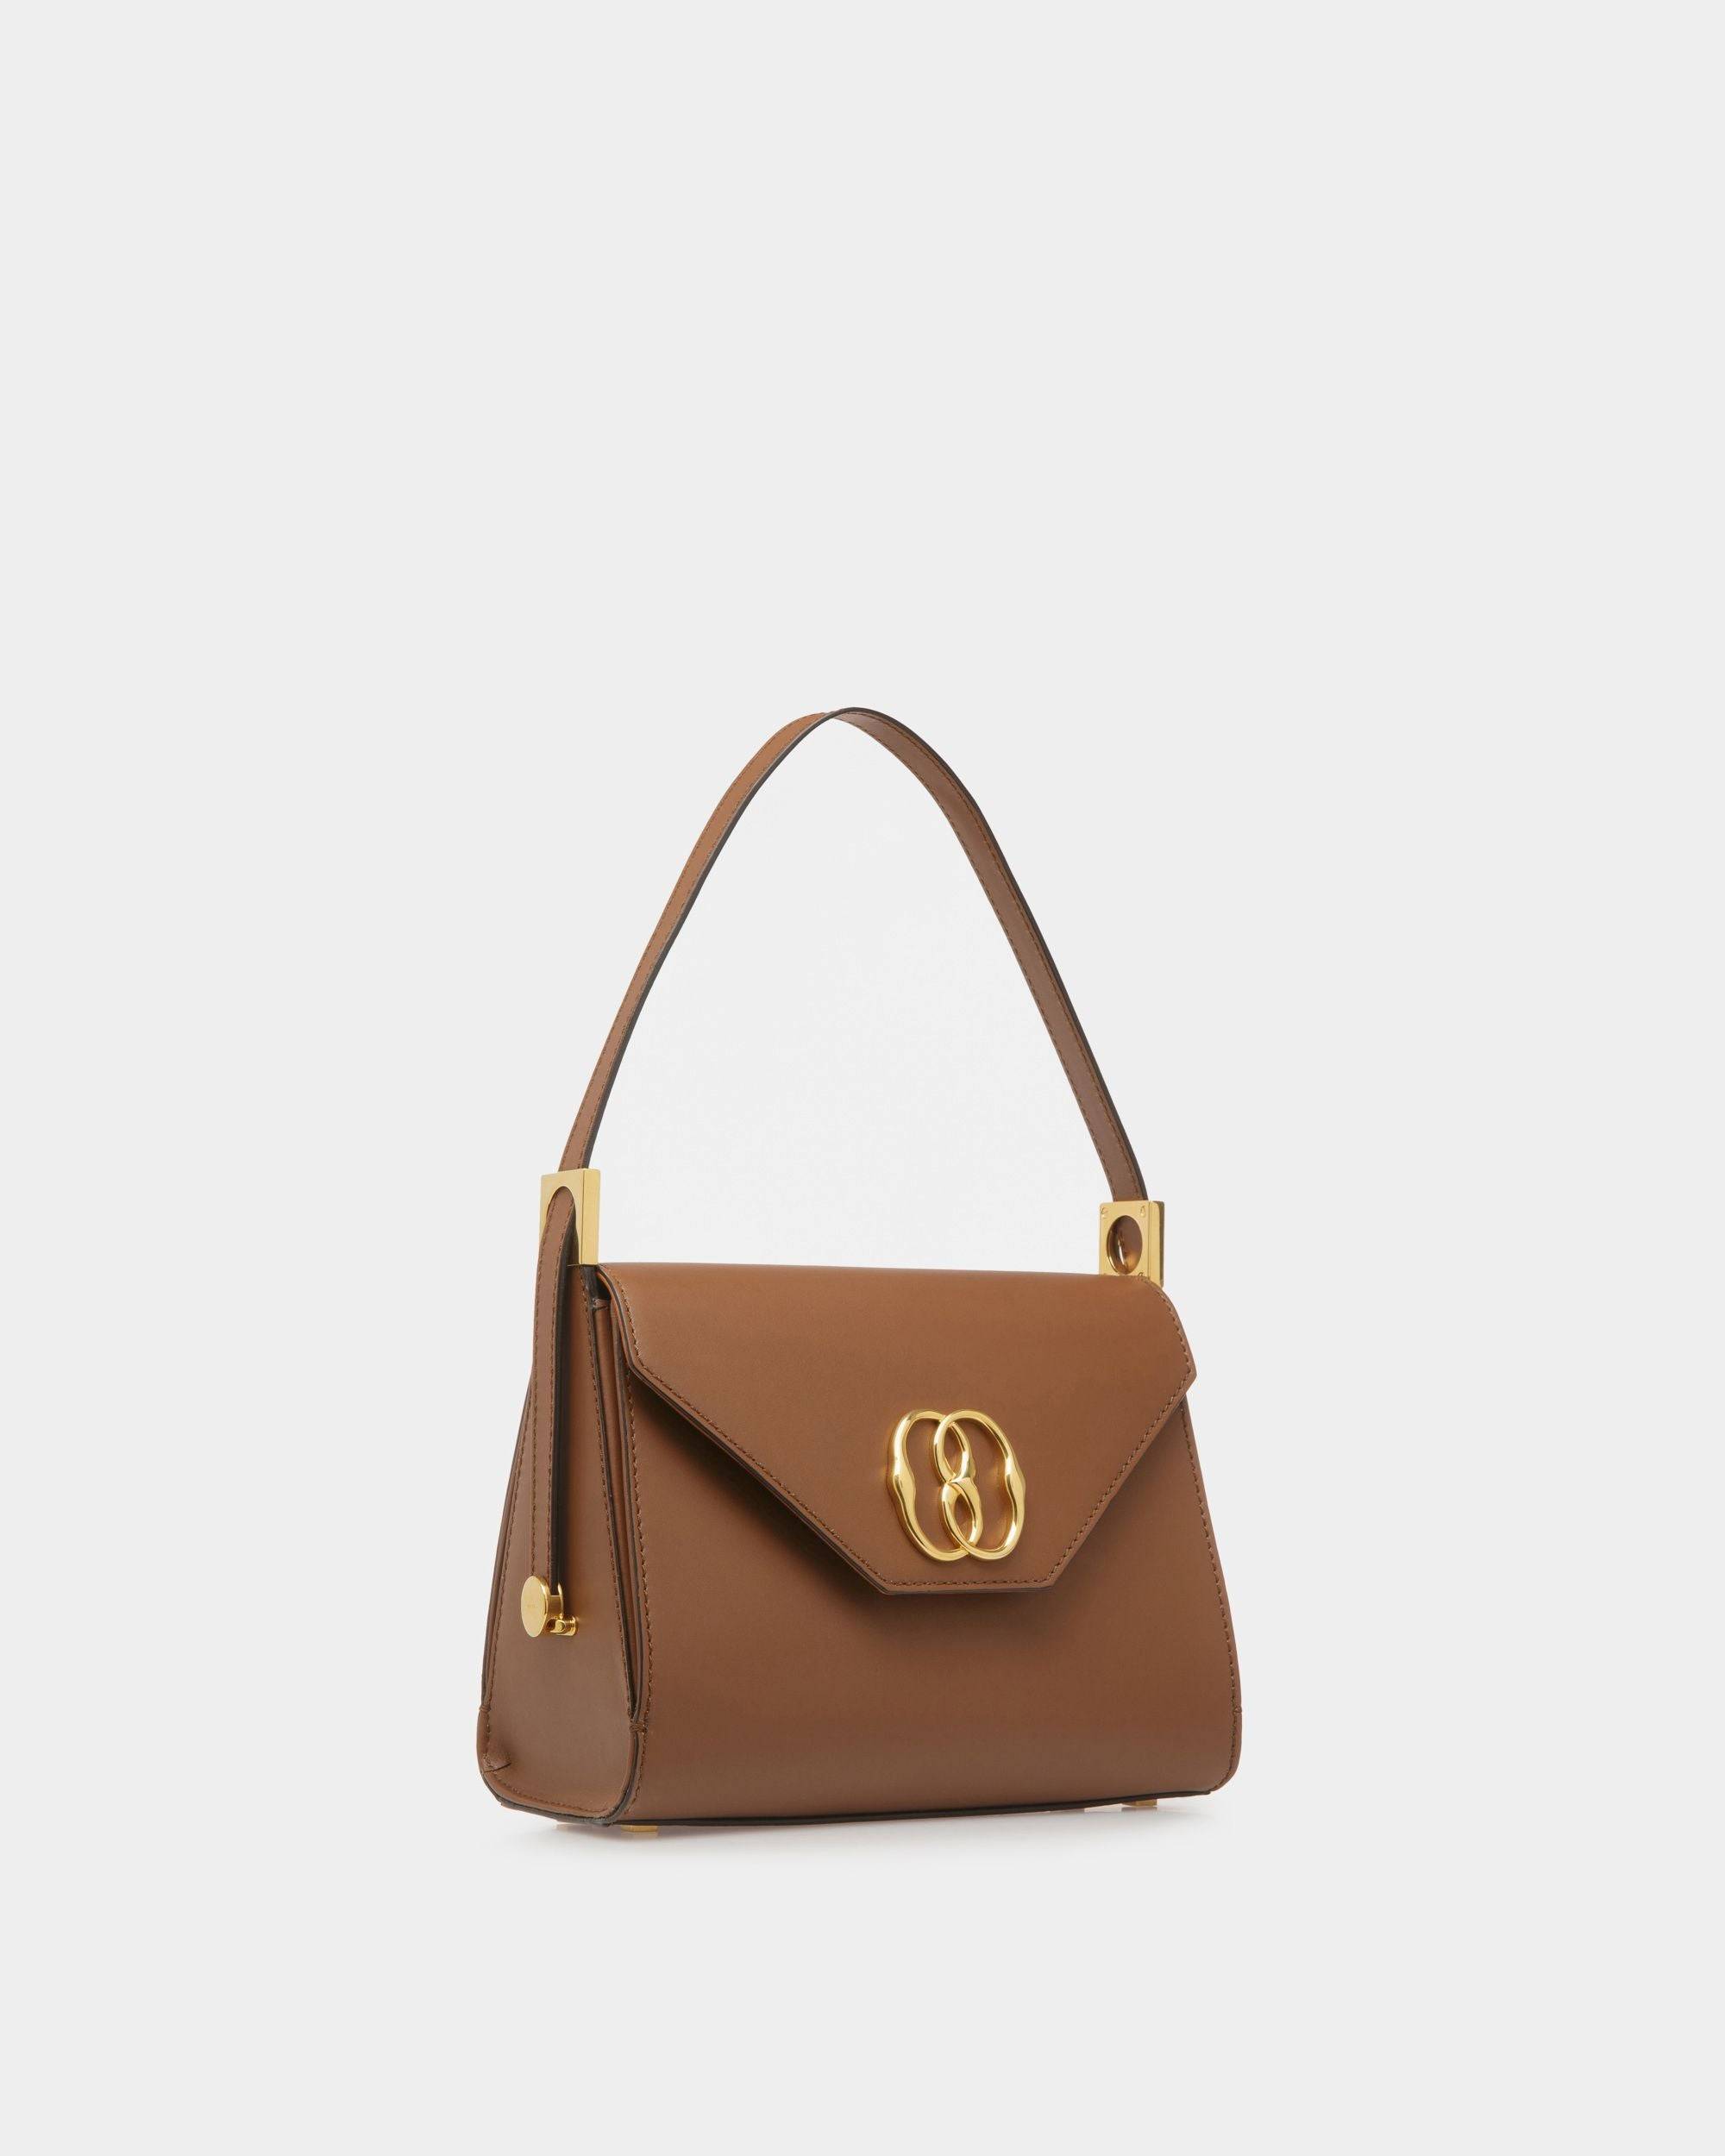 Emblem Trapeze | Women's Top Handle Purse | Brown Leather | Bally | Still Life 3/4 Front